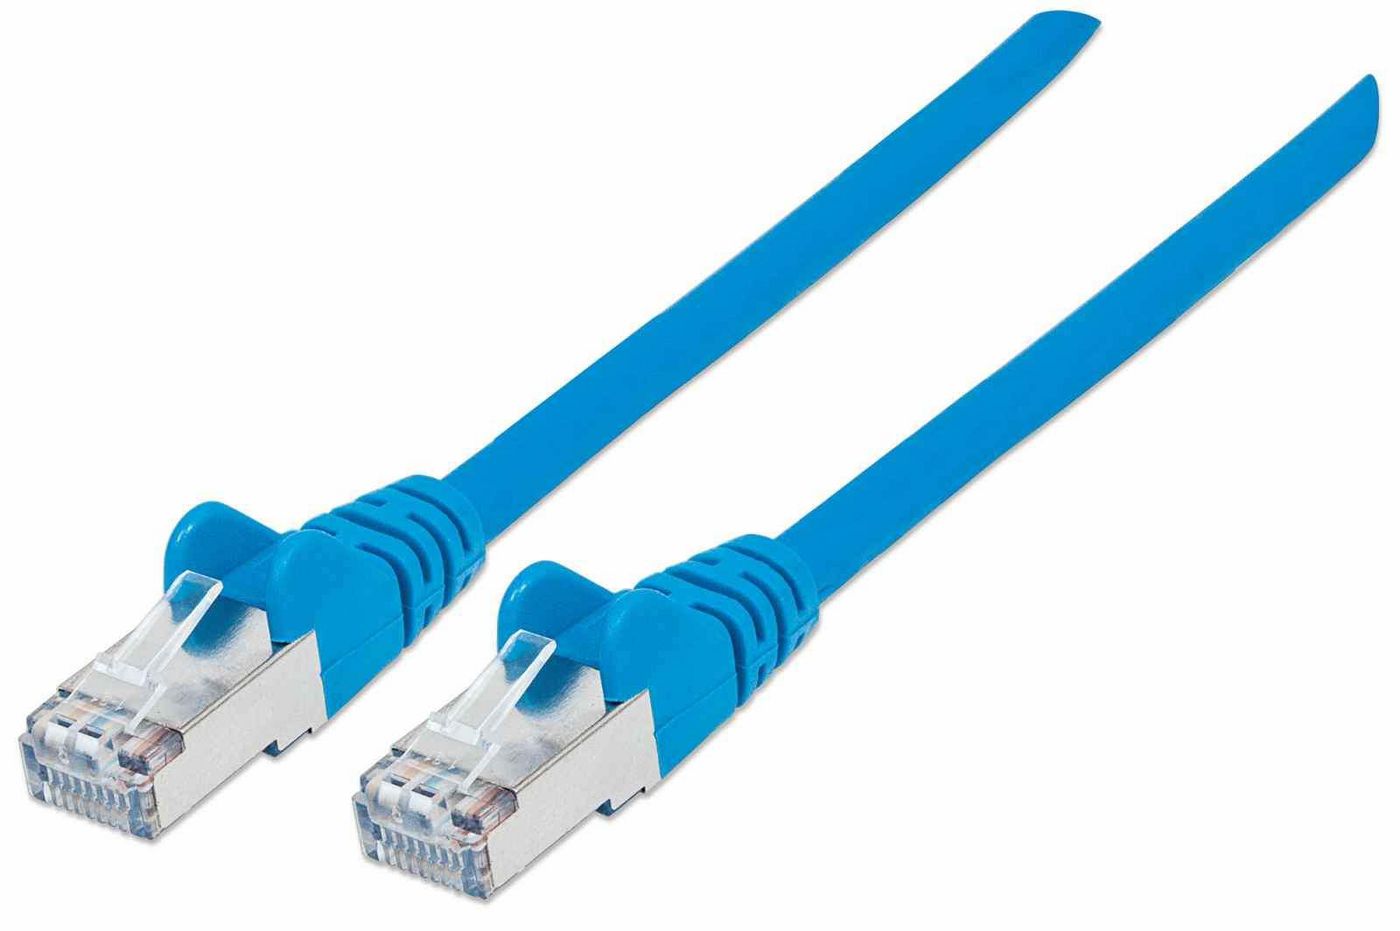 Intellinet 740852 High Performance Network Cable 